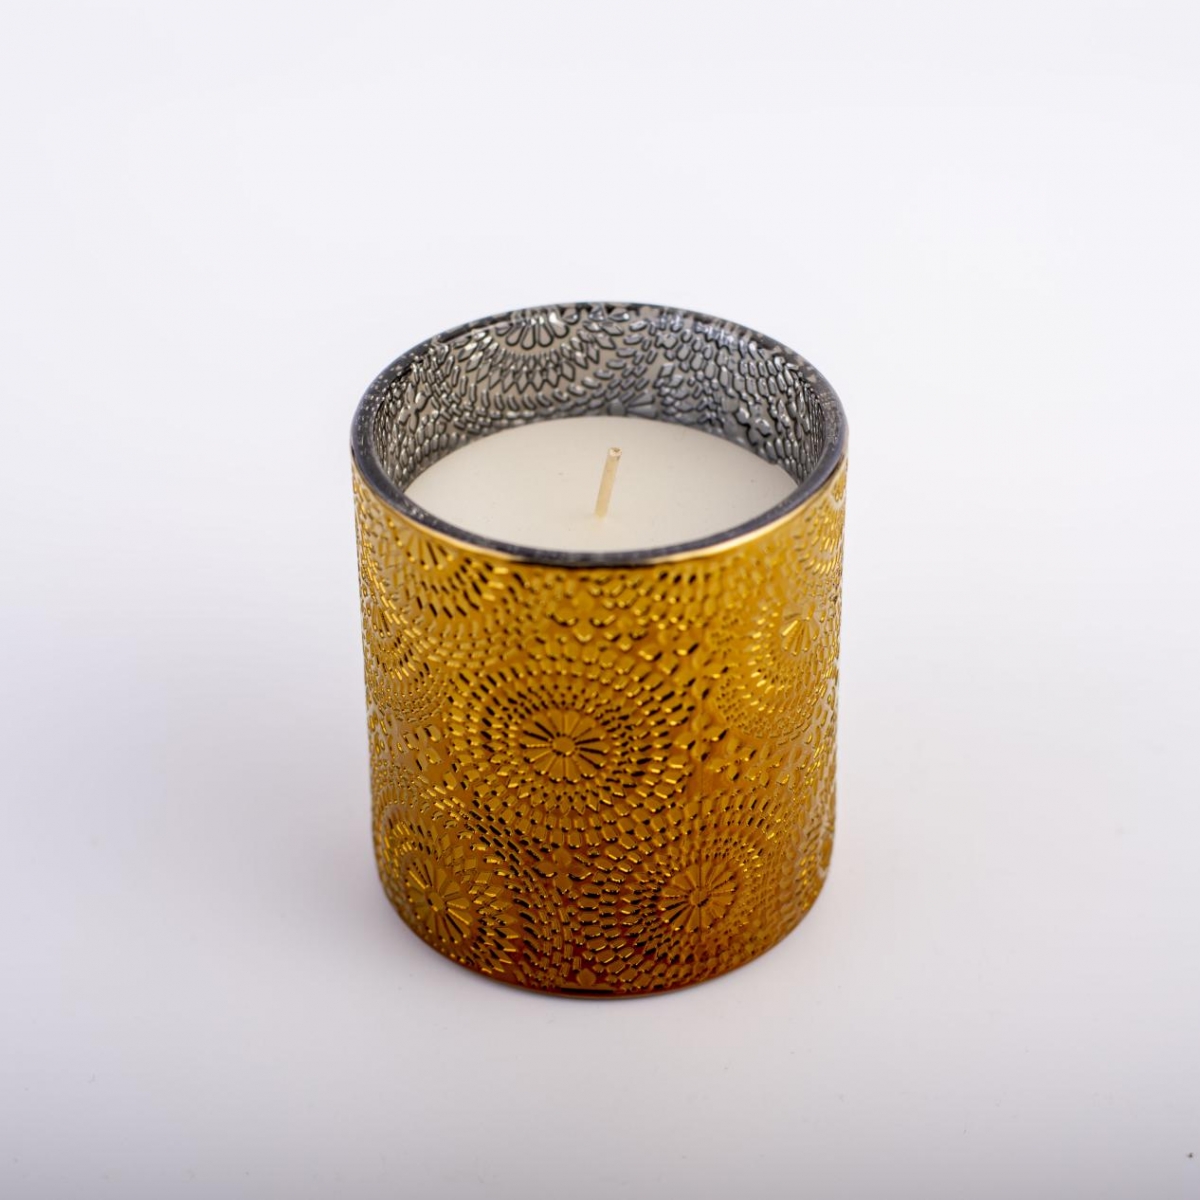 Vegan Candles -Best Soy Wax ,Geometry Sunflower ,Gold Glass Jar ,Scented Candles ,China Factory ,Price-HOWCANDLE-Candles,Scented Candles,Aromatherapy Candles,Soy Candles,Vegan Candles,Jar Candles,Pillar Candles,Candle Gift Sets,Essential Oils,Reed Diffuser,Candle Holder,